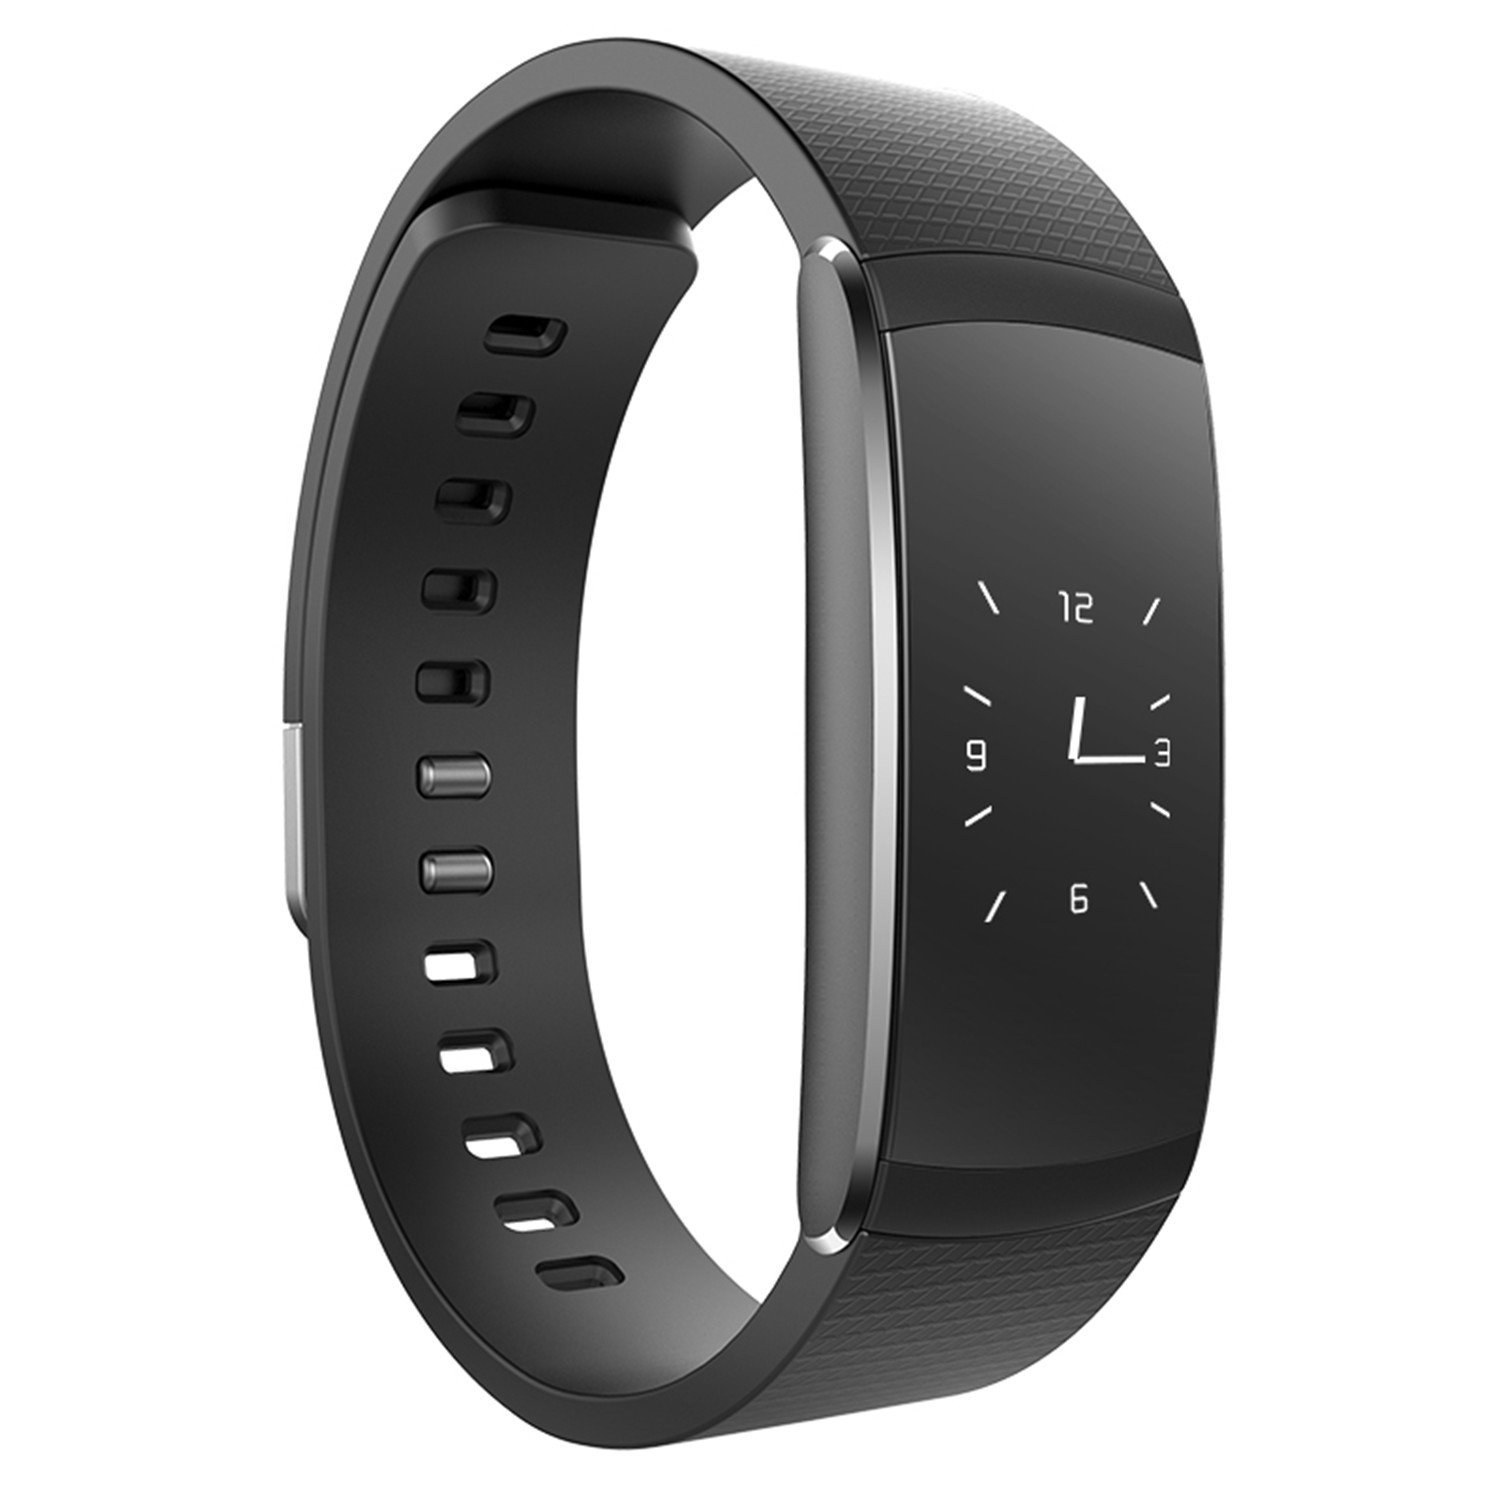 best budget fitness tracker very accurate and affordable | superfashion.us